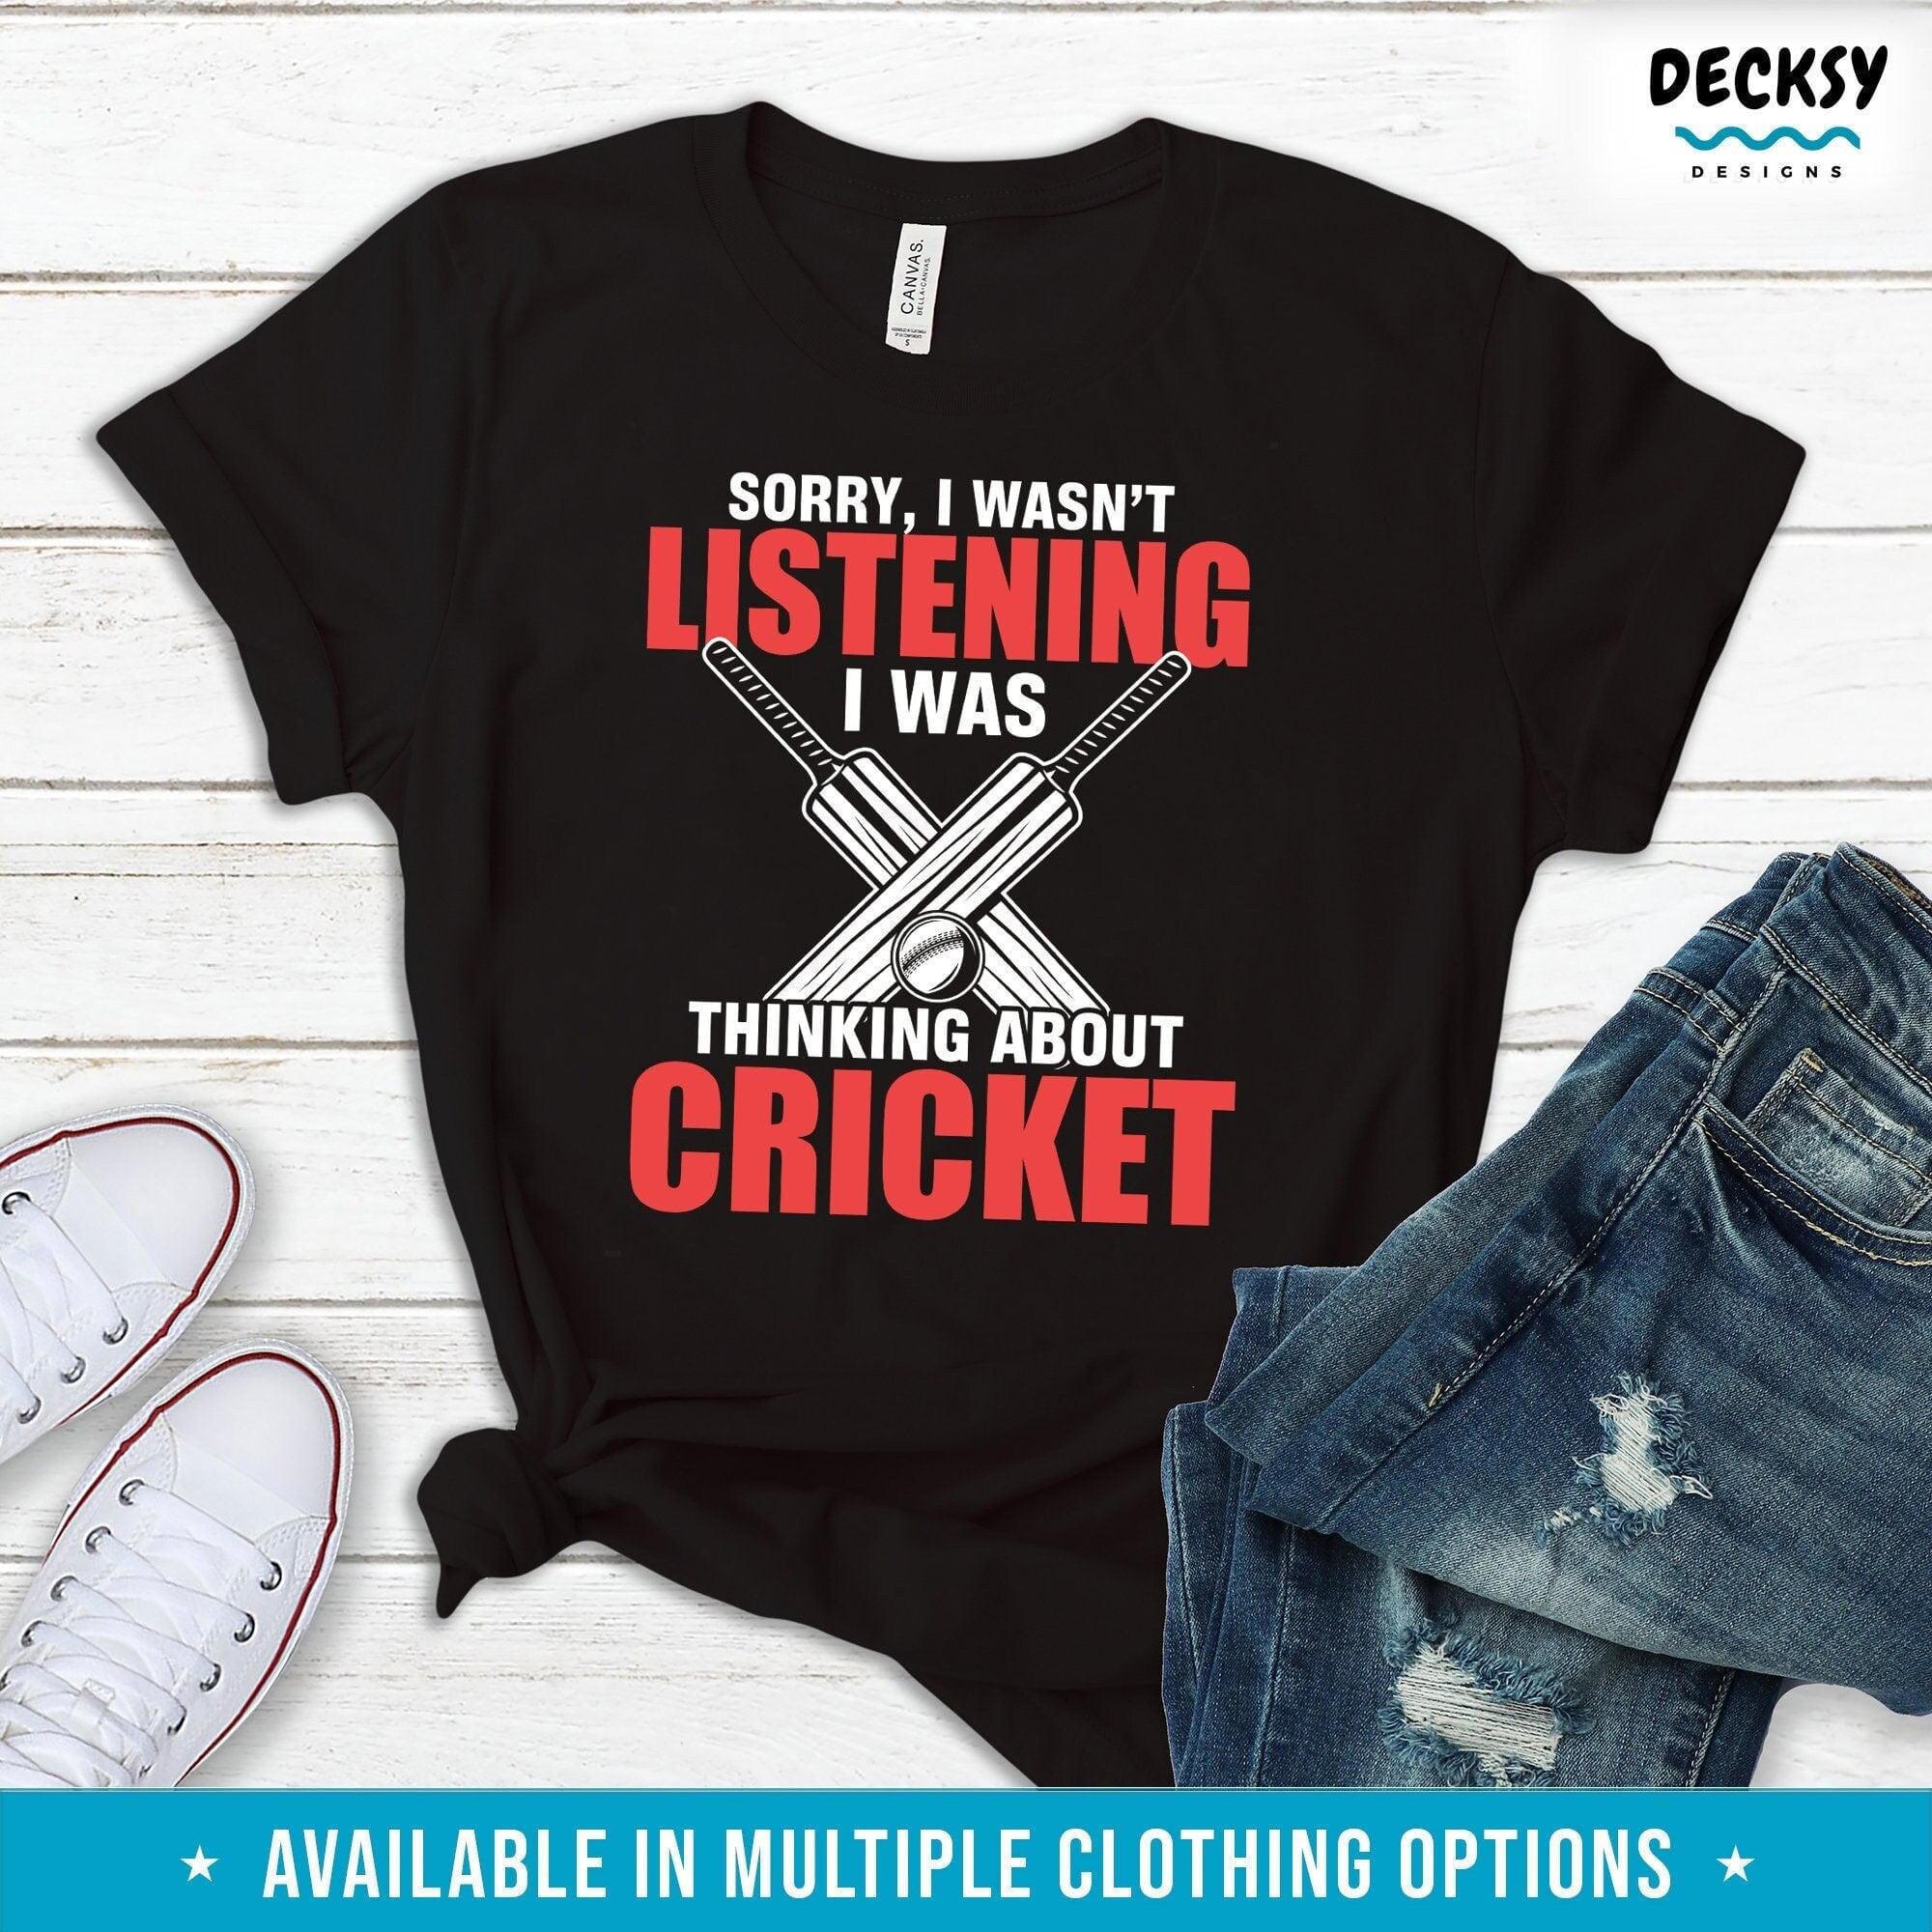 Cricket Shirt, Cricket Lover Gift-Clothing:Gender-Neutral Adult Clothing:Tops & Tees:T-shirts:Graphic Tees-DecksyDesigns